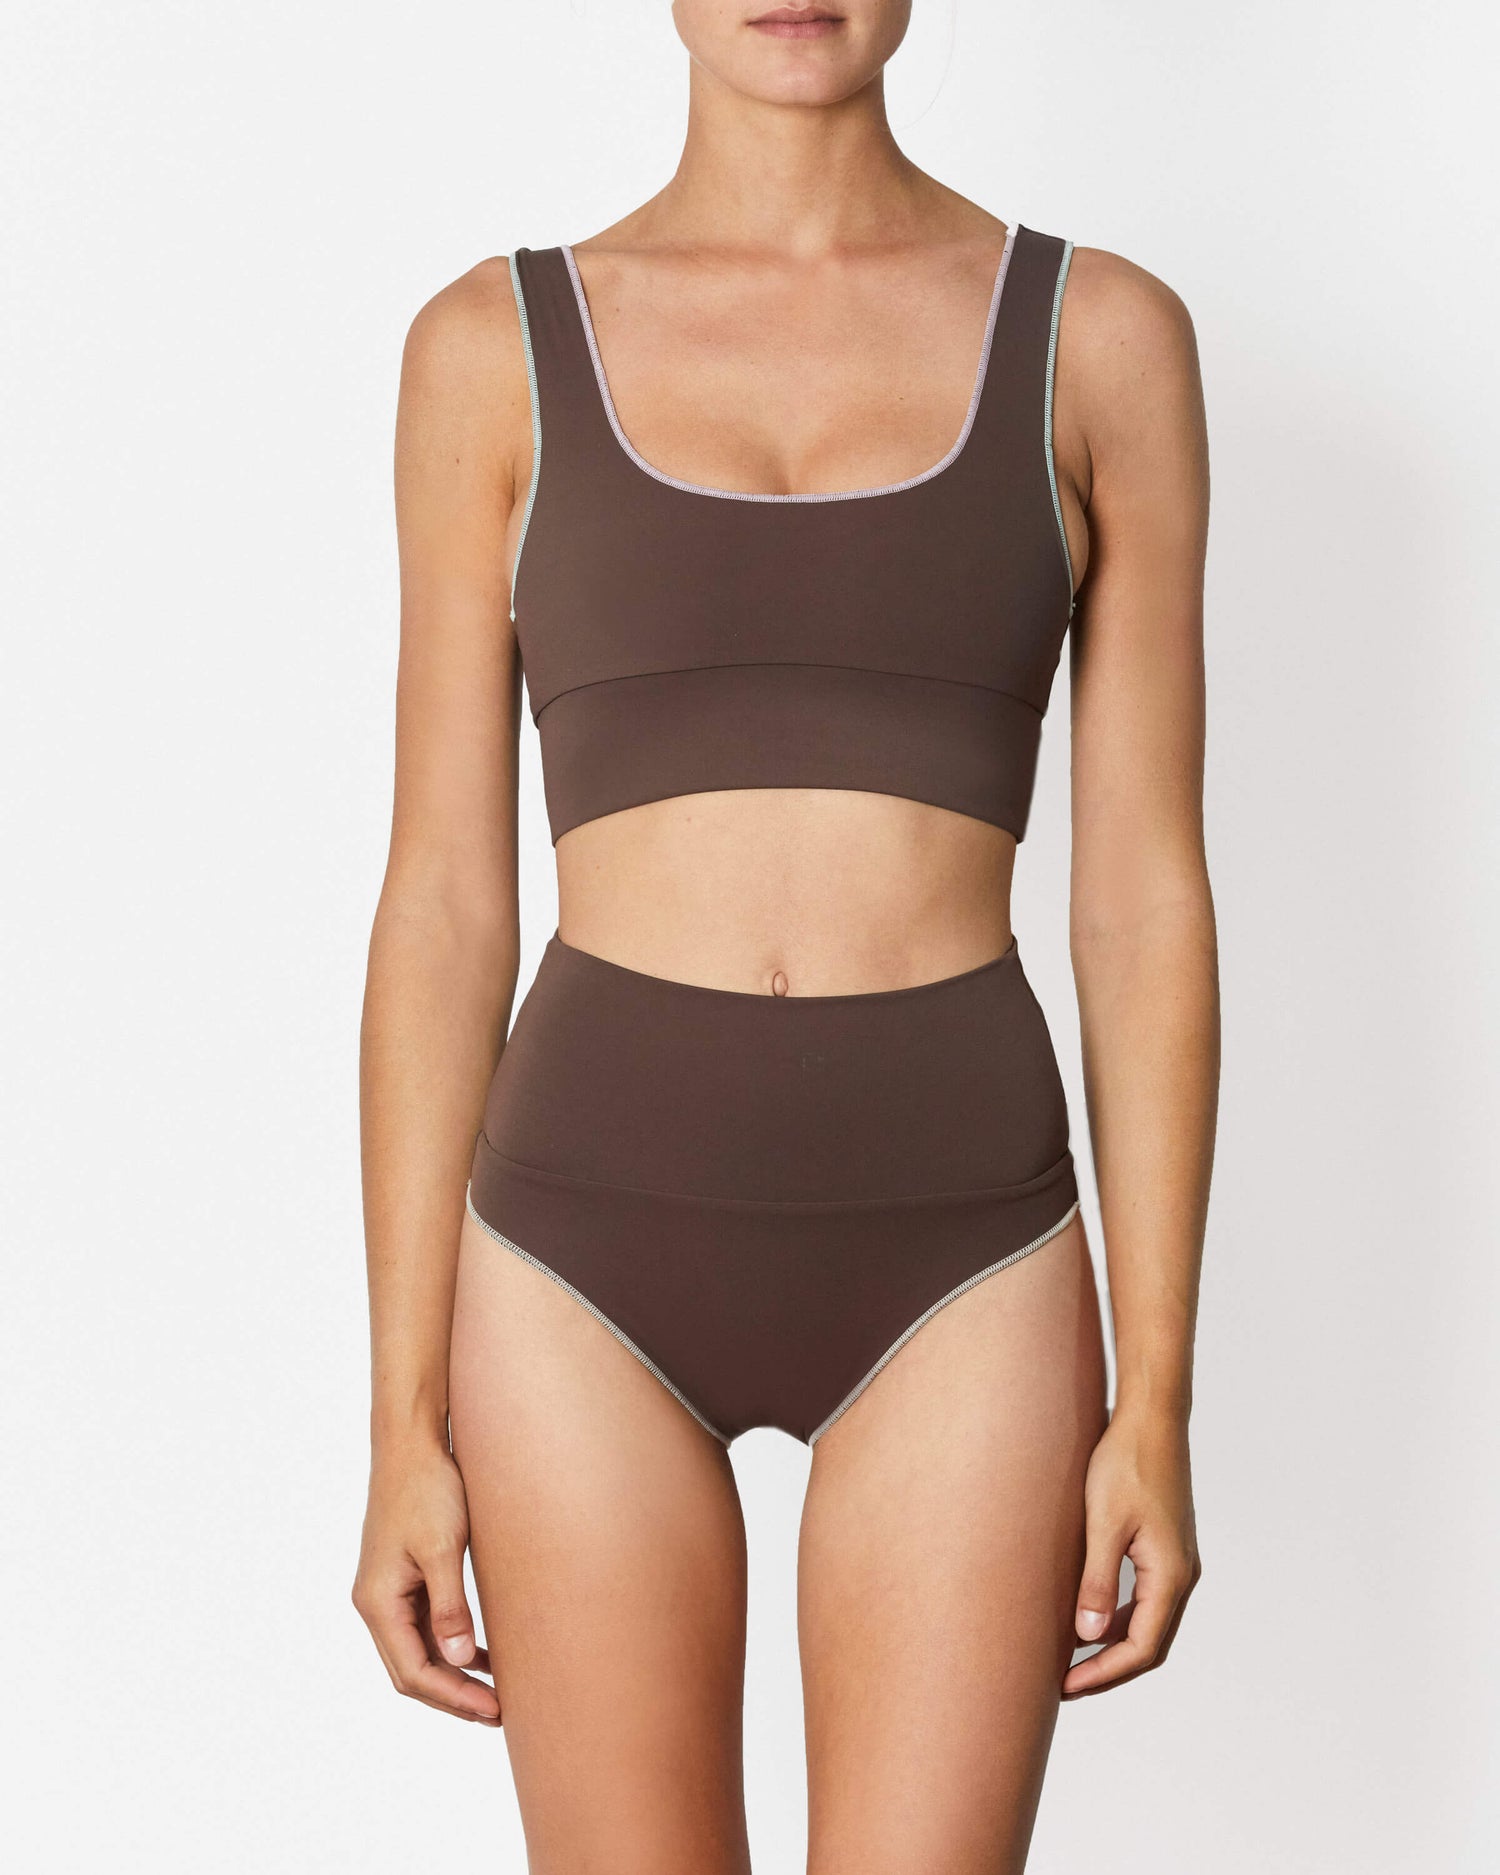 It's Now Cool Badebekleidung - Contour Crop Top - Fudgesicle